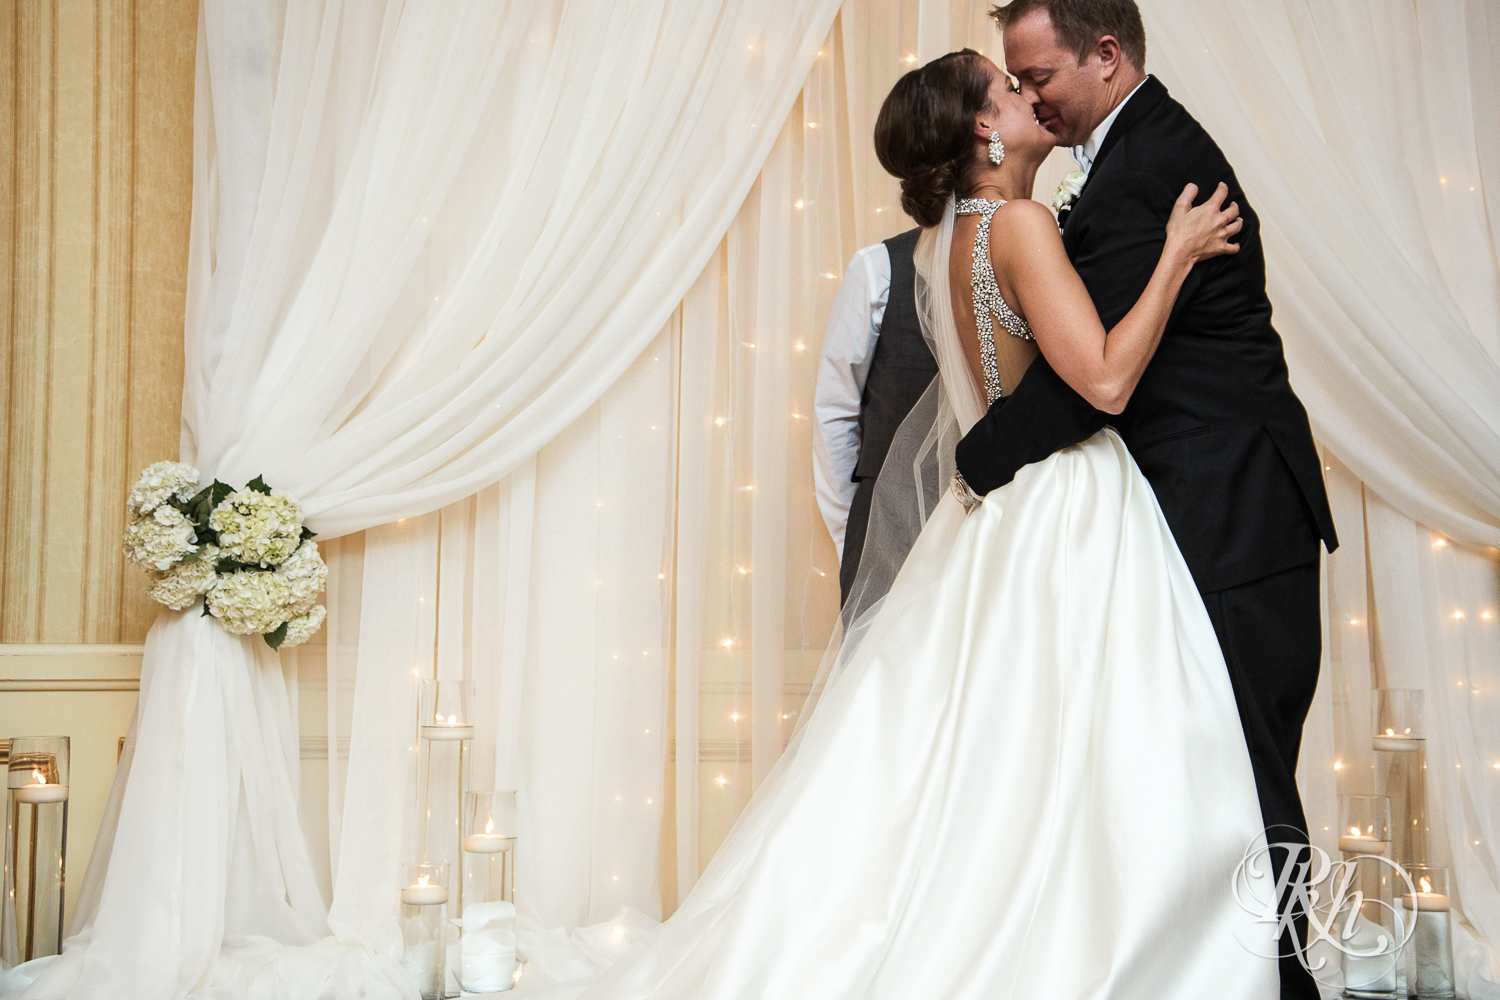 Bride and groom kiss during wedding ceremony at The Saint Paul Hotel in Saint Paul, Minnesota.